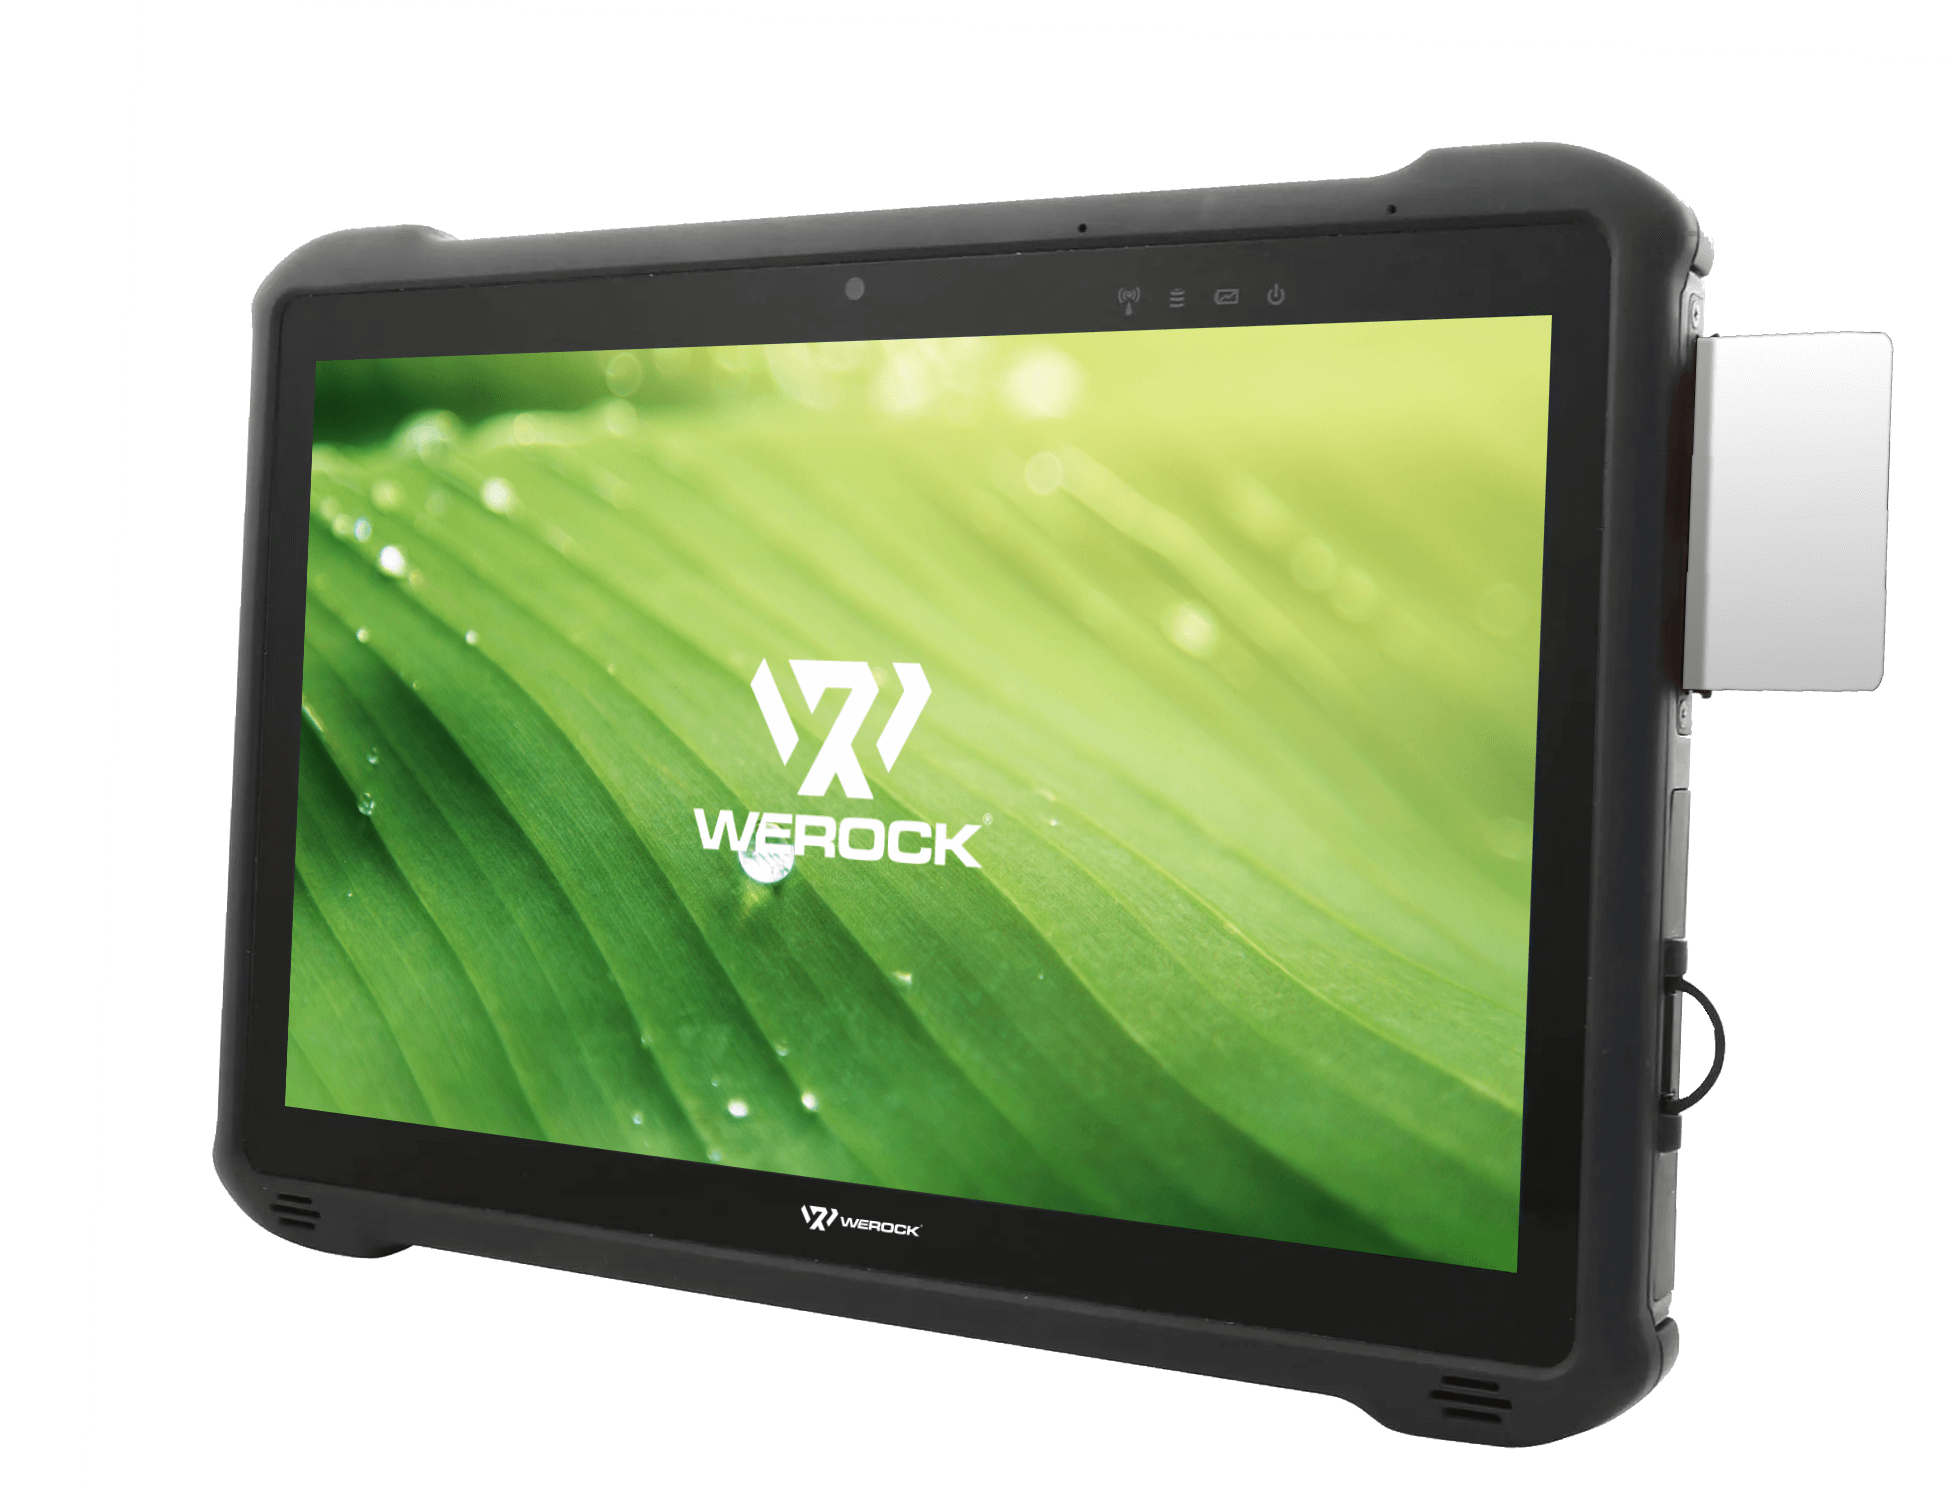 Rocktab U212 Rugged Tablet view from front with card reader